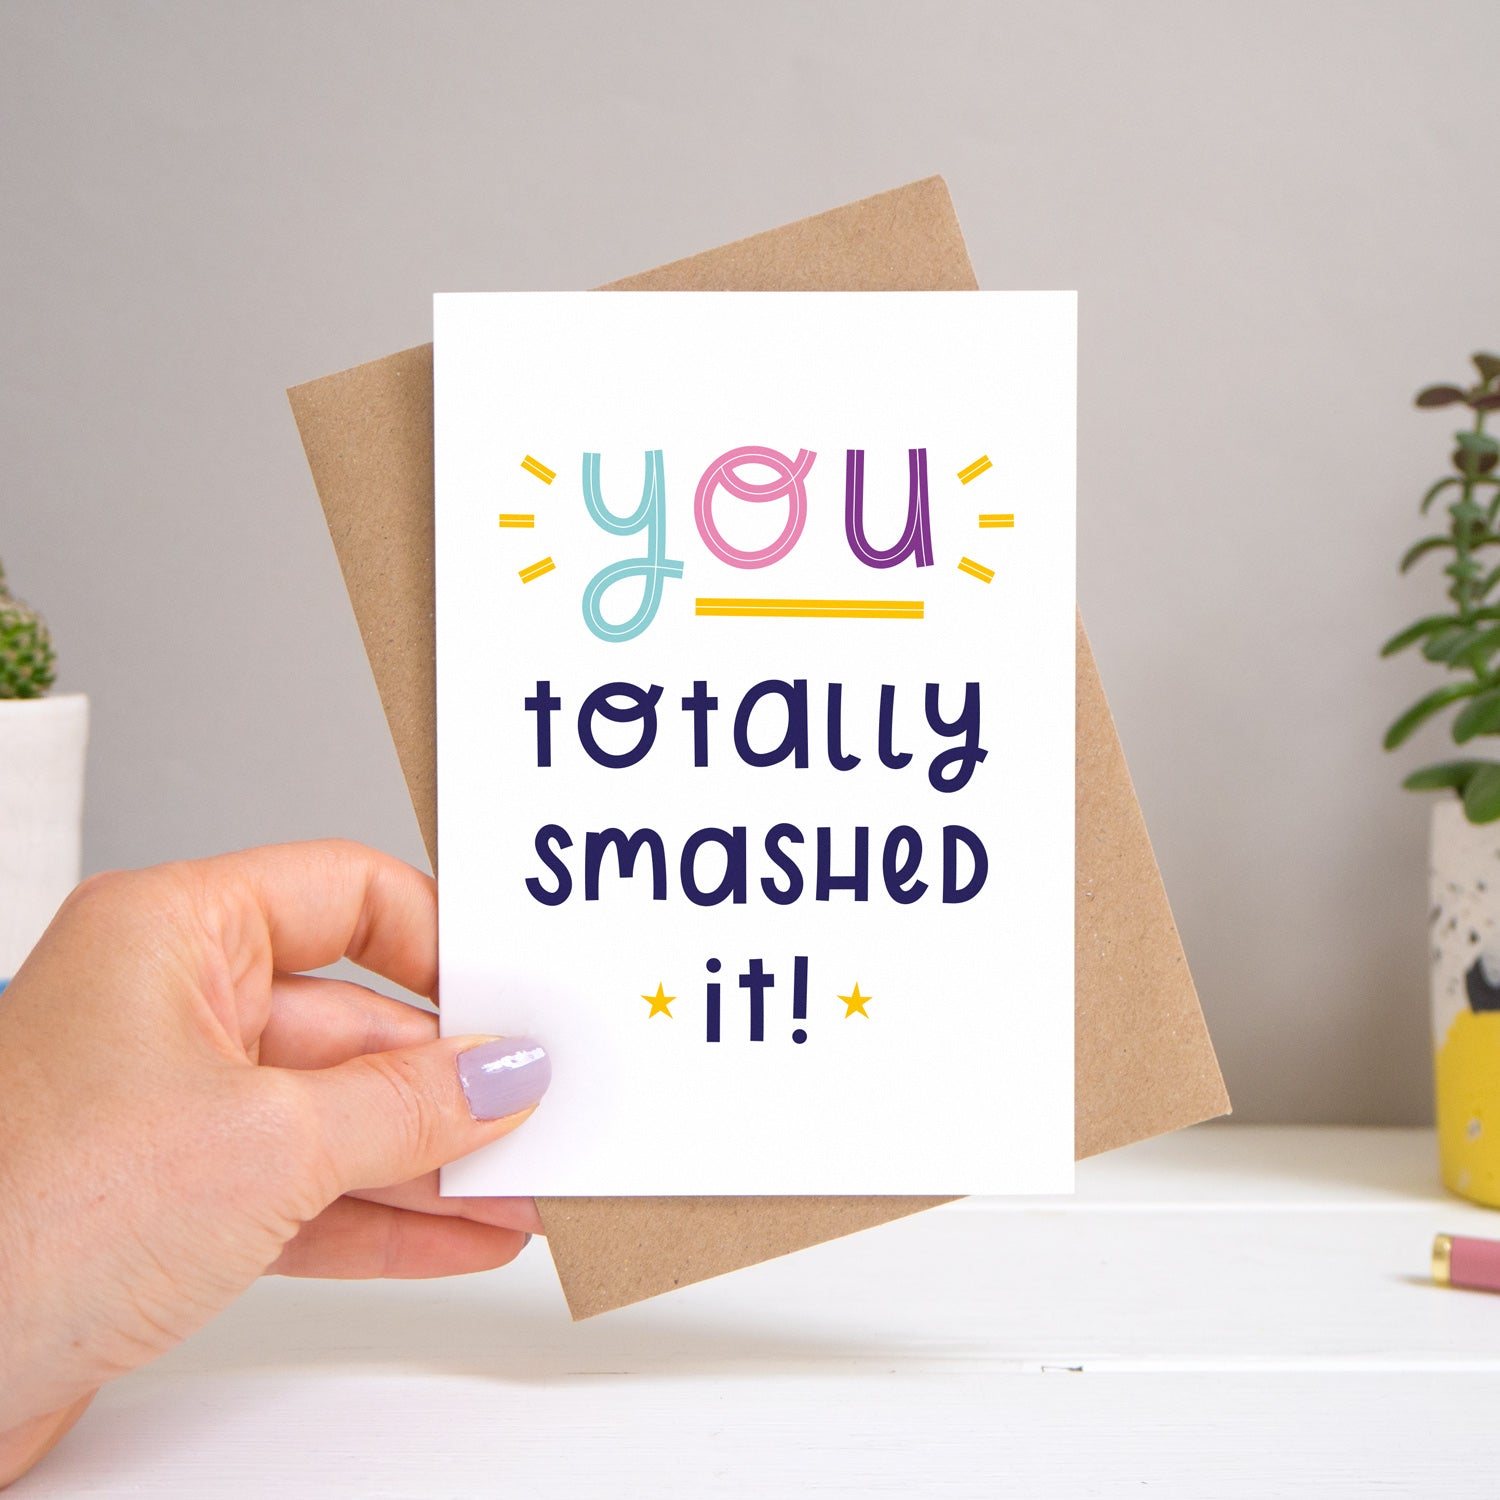 A ‘you totally smashed it’ card held over a warm grey and white background with potted plants peeping the sides. Behind the card is a kraft brown envelope that comes with the card. The text on this version of the card is in varying tones of navy and pink, purple and blue.